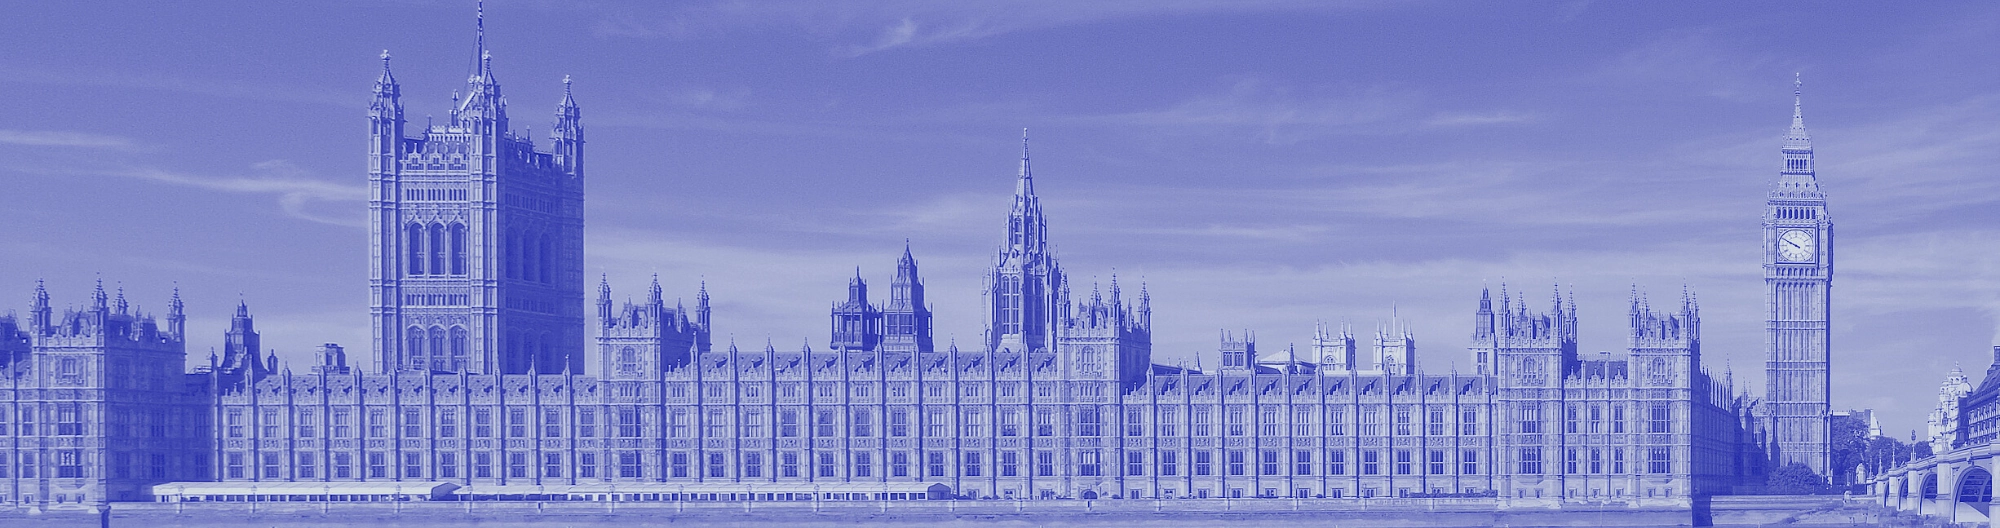 wide angle image of the UK houses of parliament with a blue filter